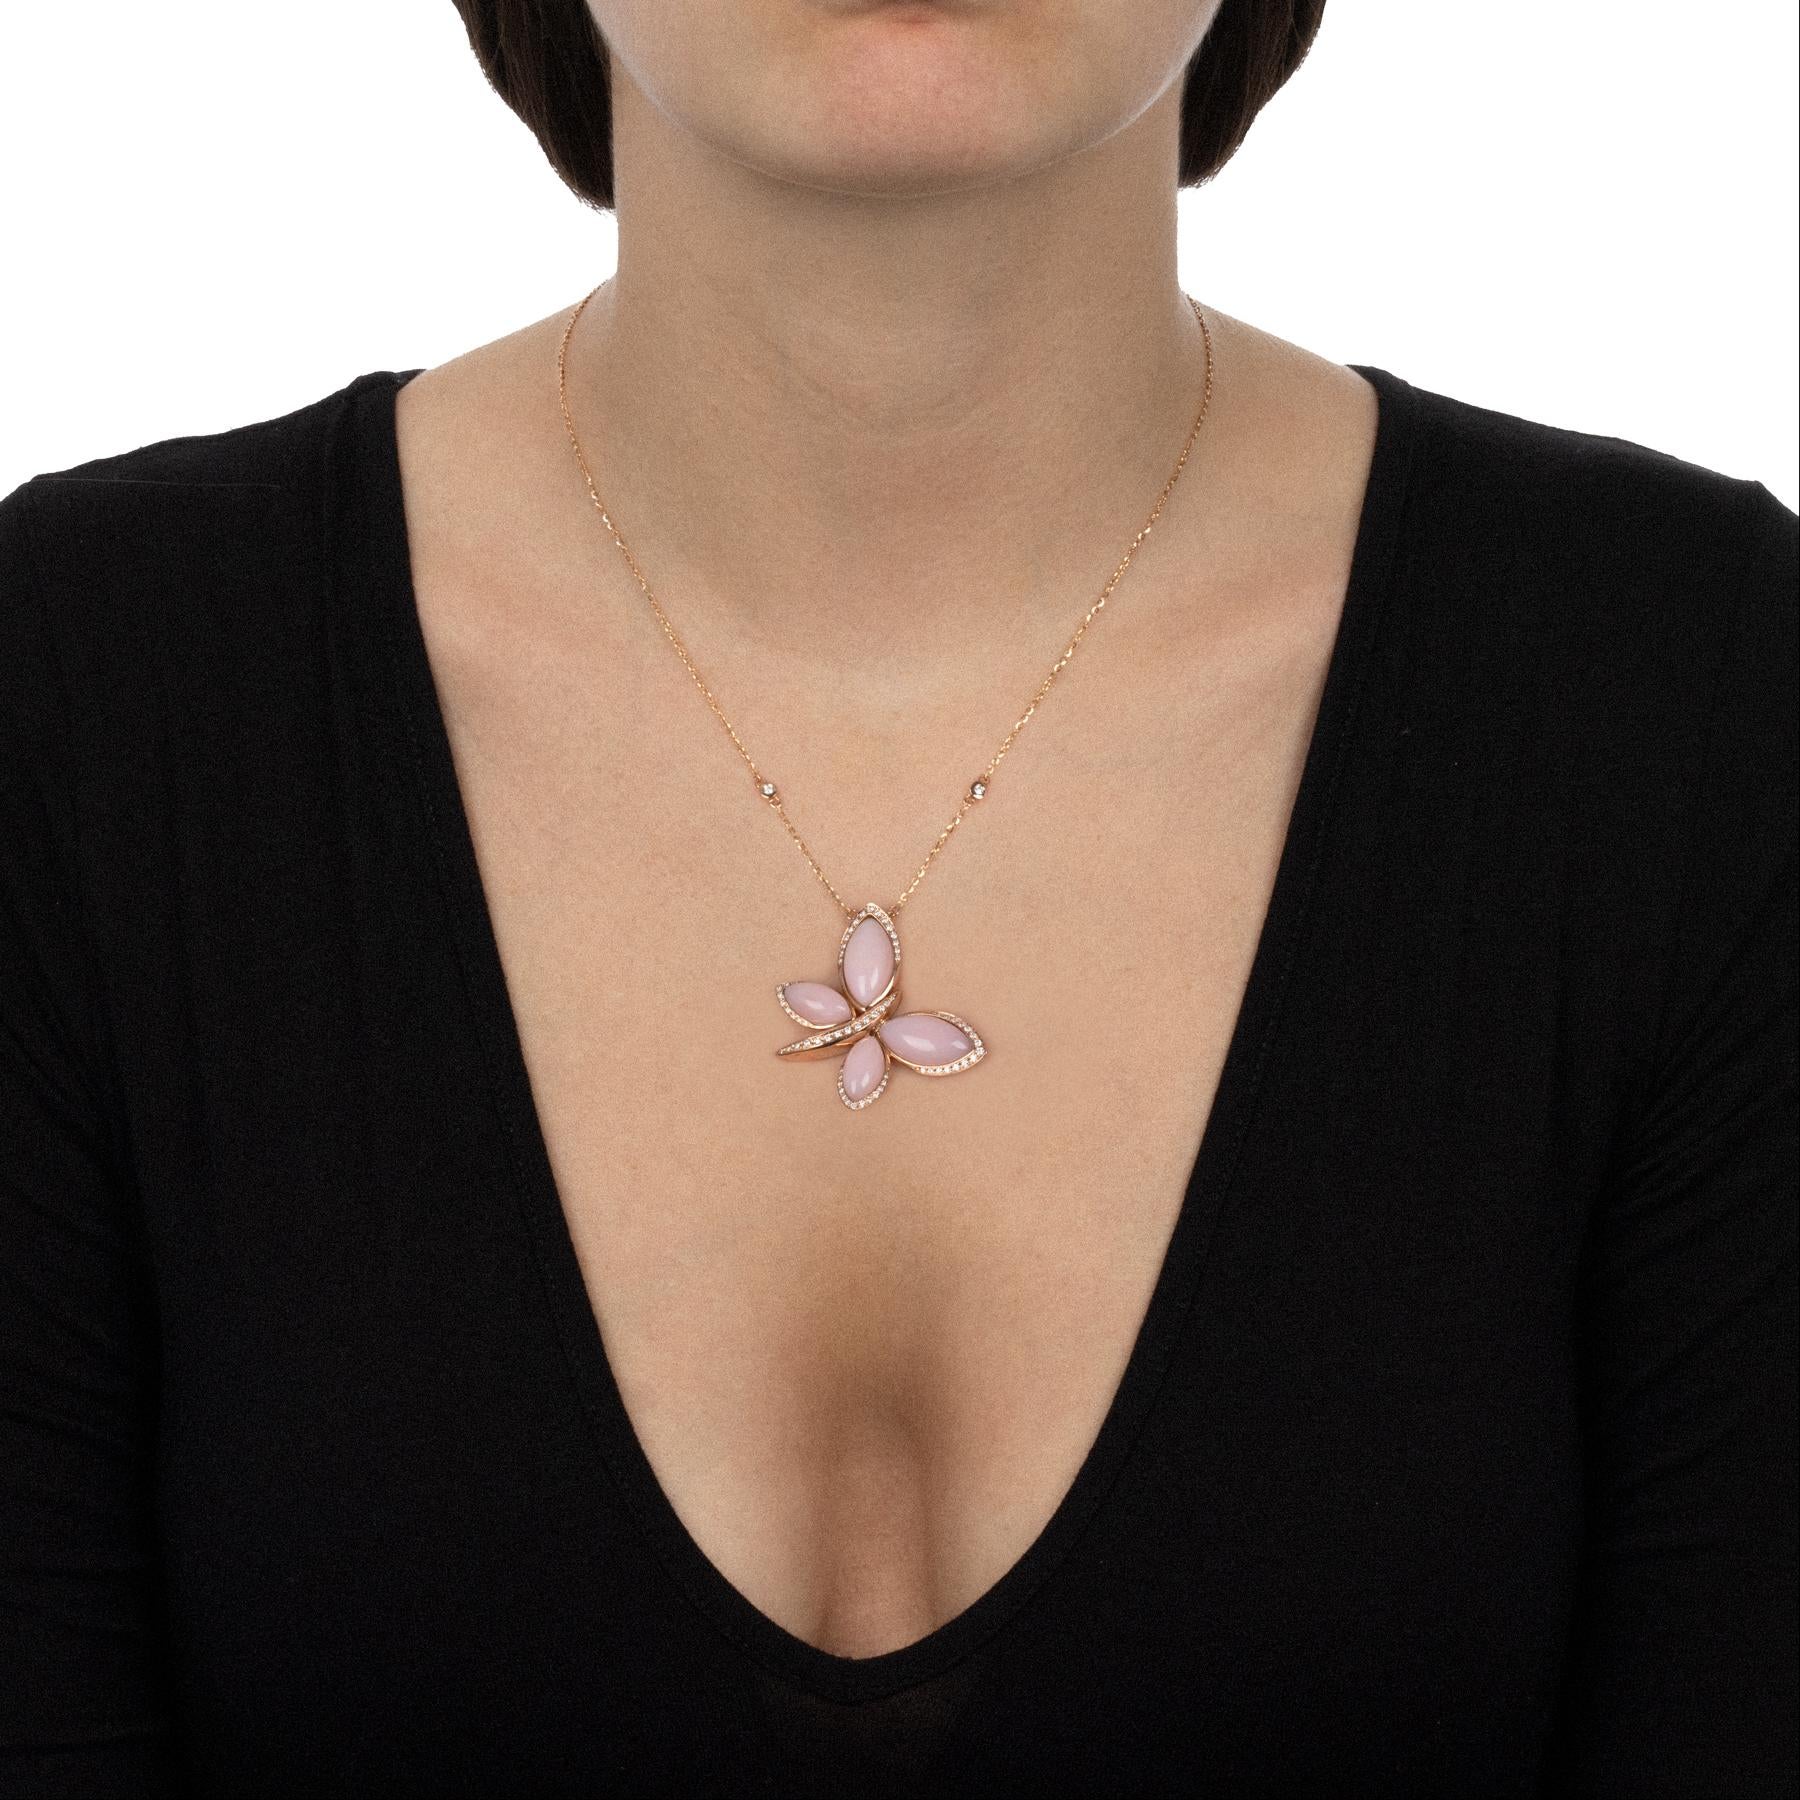 Fresh and playful like a summer memory, this necklace is sophisticated and efferverscent at the same time. The vibrant pink shade of the opal adds a touch of joyful elegance, while the diamonds accent add some sparkle. A handmade contemporary